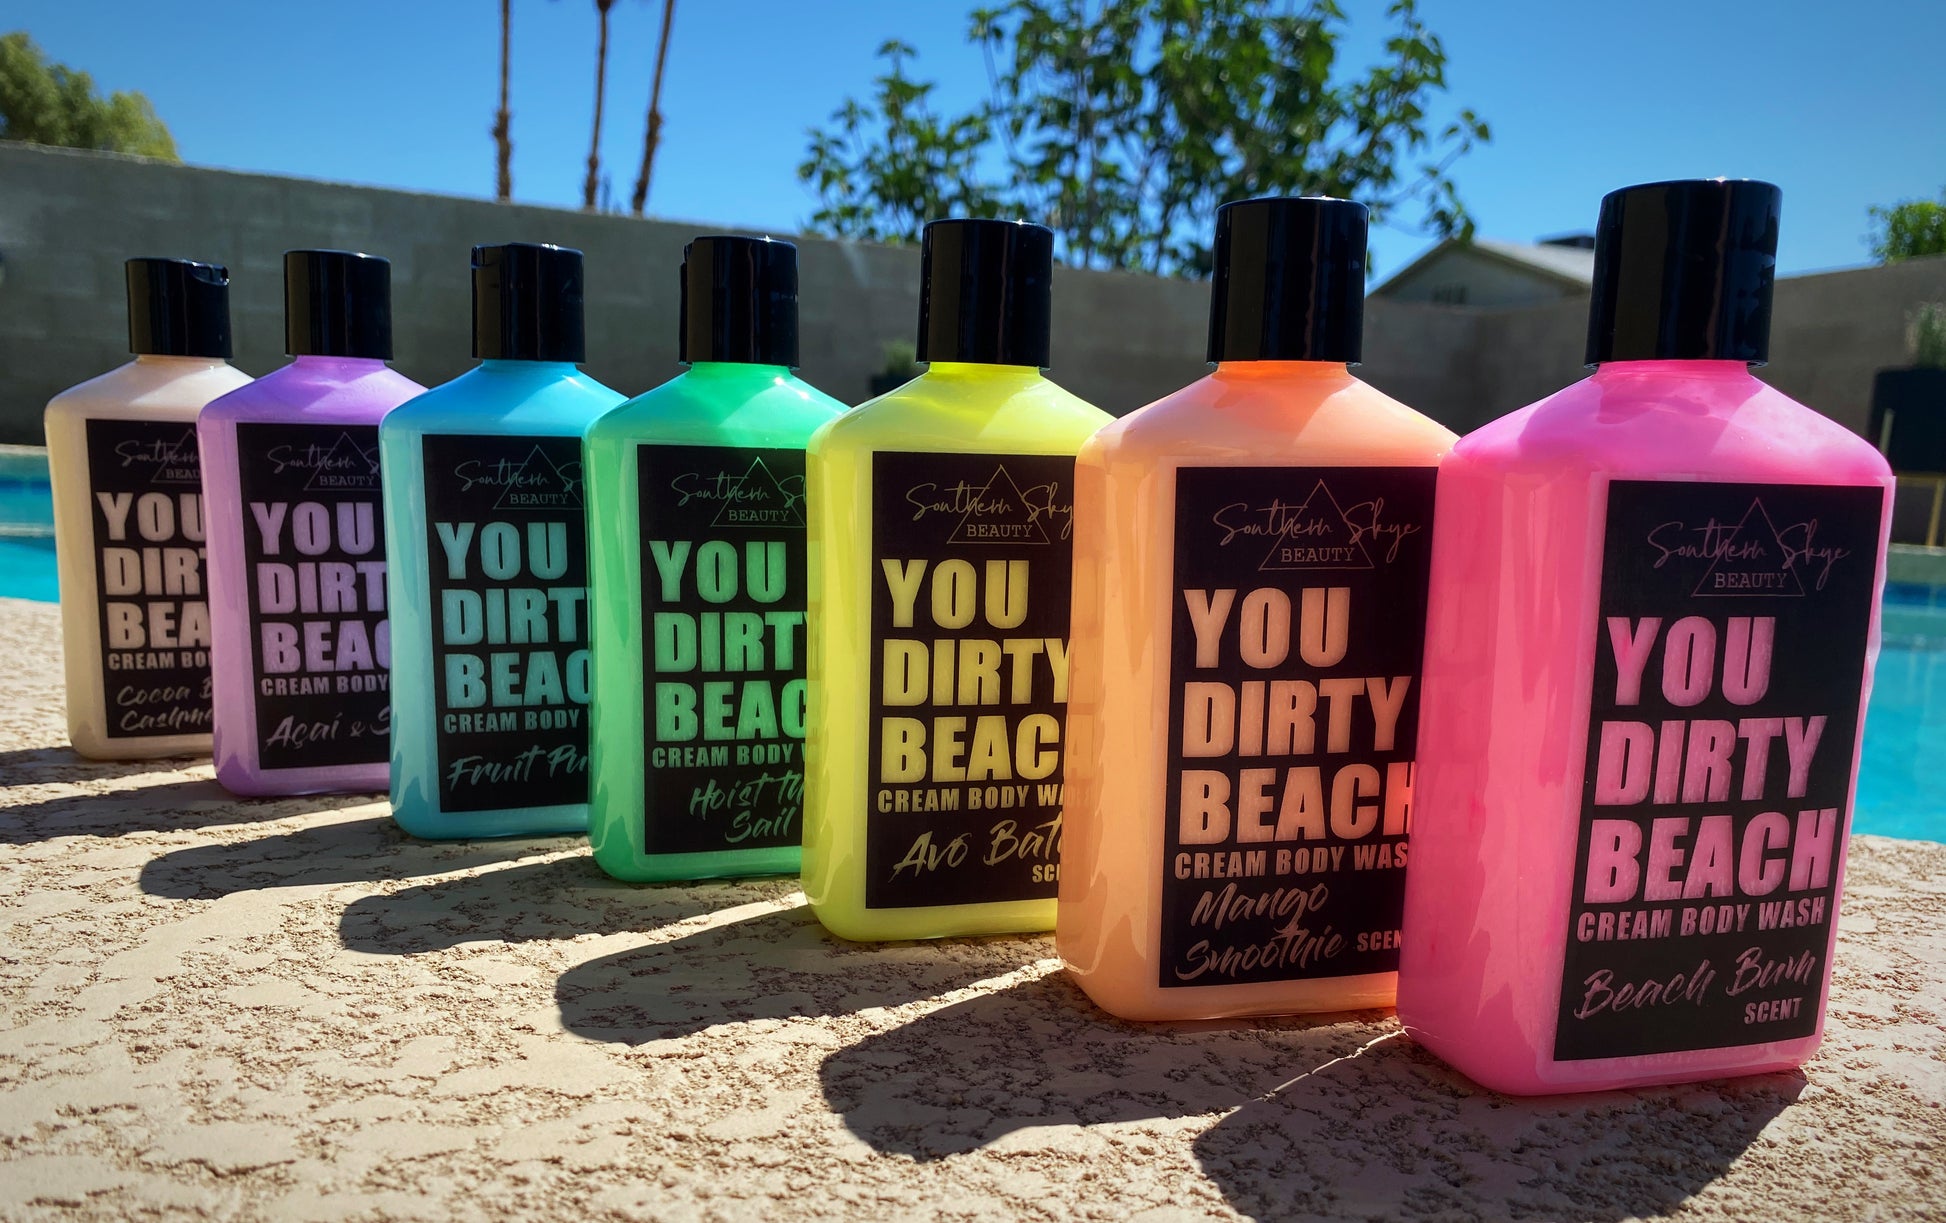 All scents of Southern Skye beauty You Dirty Beach Body Washes lined up